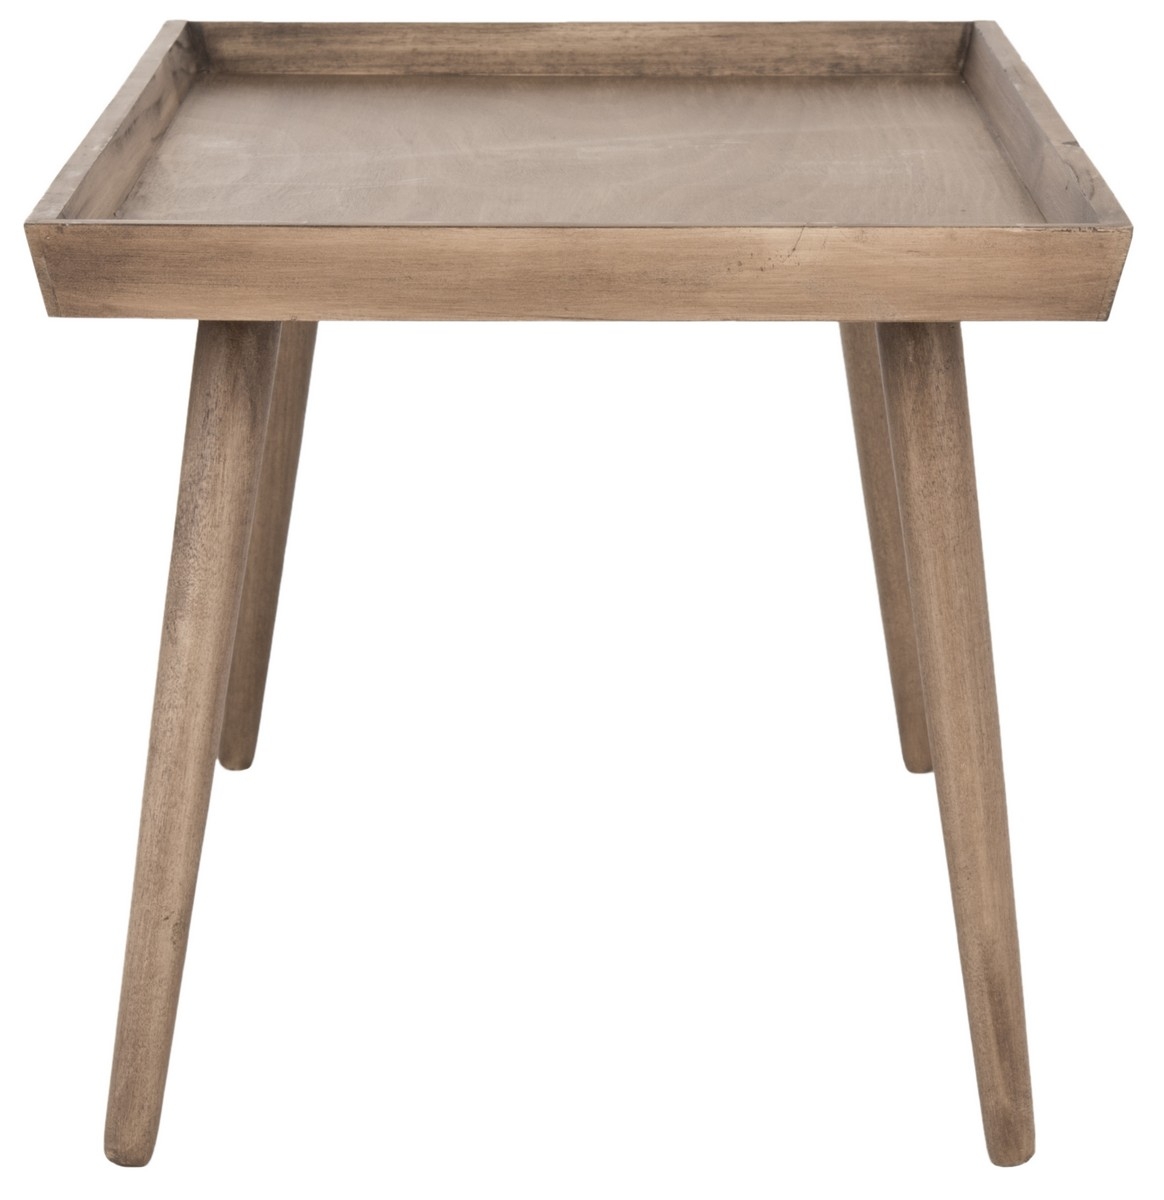 Nonie Coffee Table With Tray Top - Desert Brown - Arlo Home - Image 1